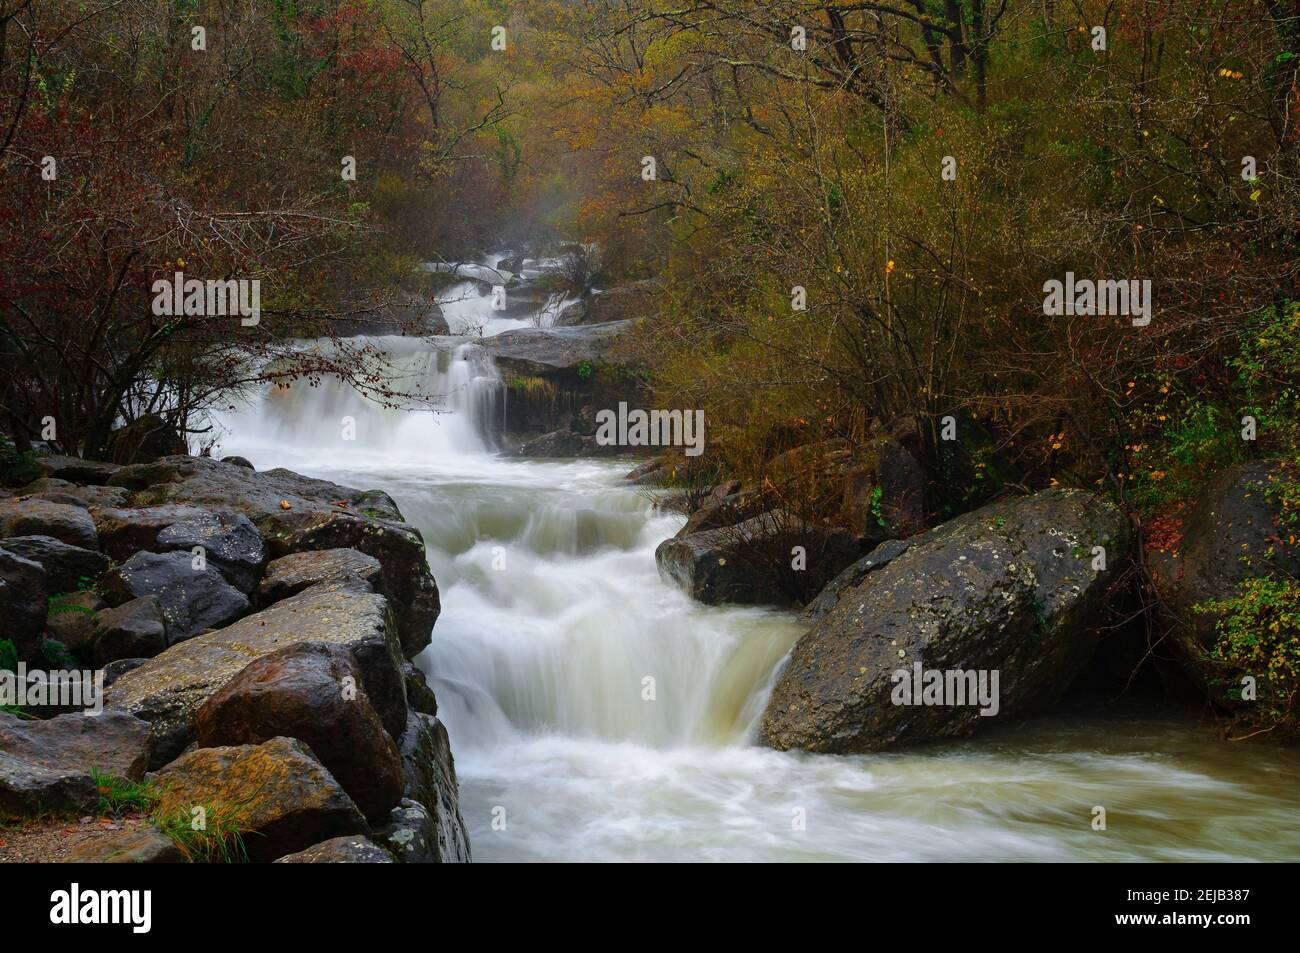 The river Gurn in the picnic area of Els Pins, after heavy rains (Vall d'en Bas, Garrotxa, Catalonia, Spain, Pyrenees) Stock Photo